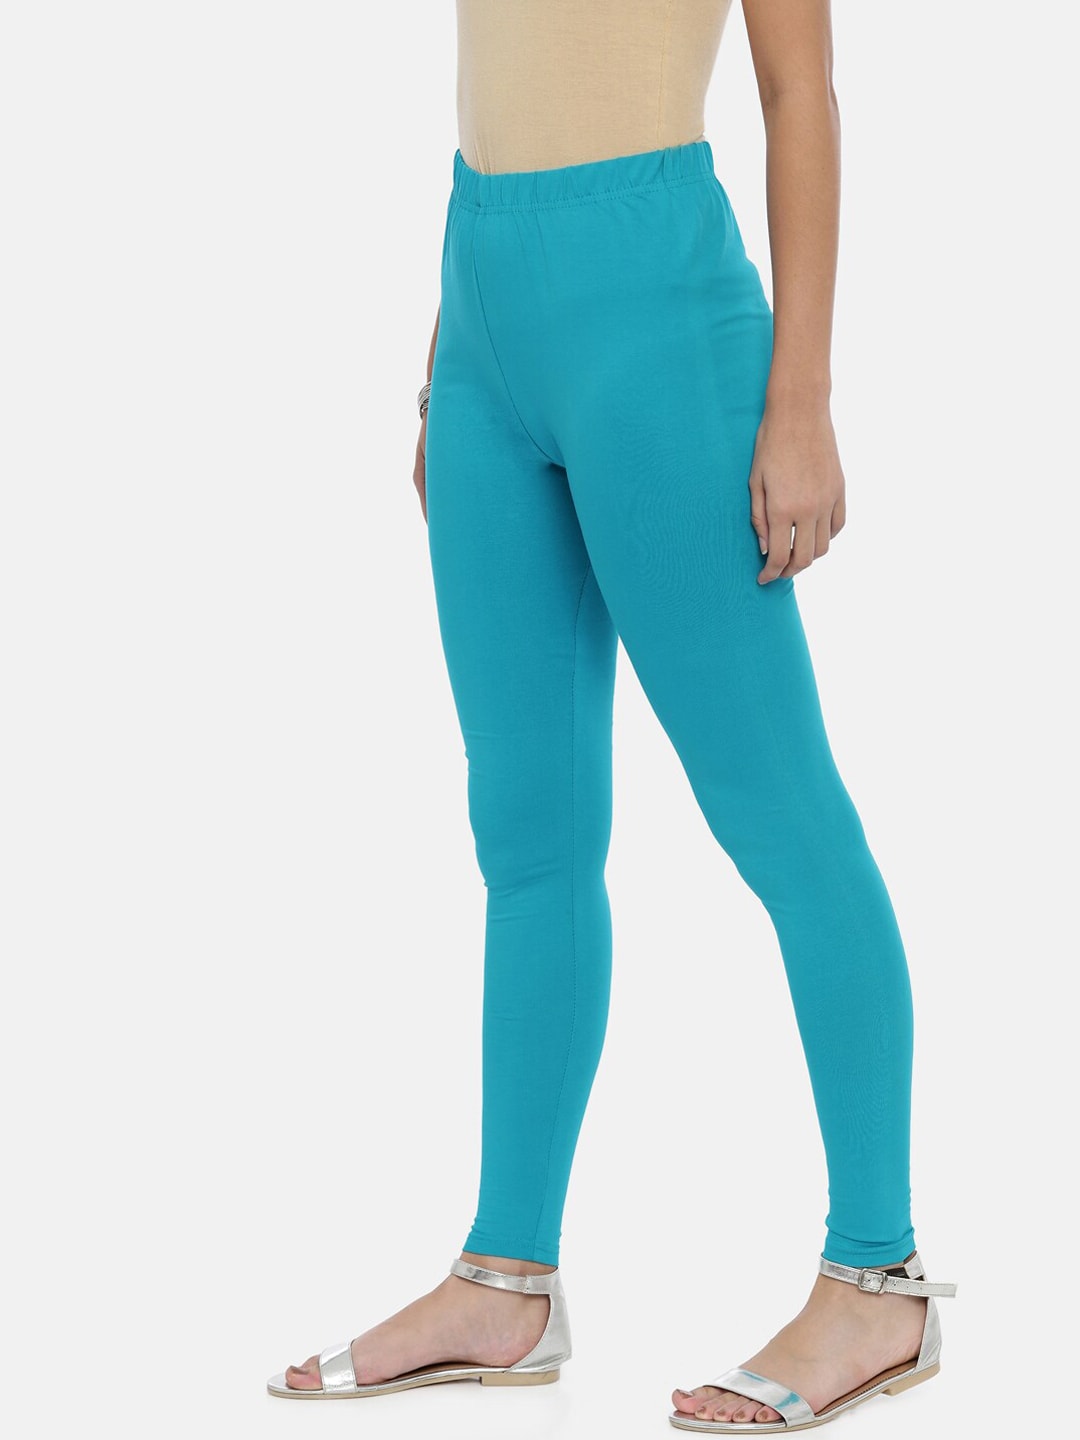 Souchii Turquoise Blue Solid Slim-Fit Ankle-Length Leggings